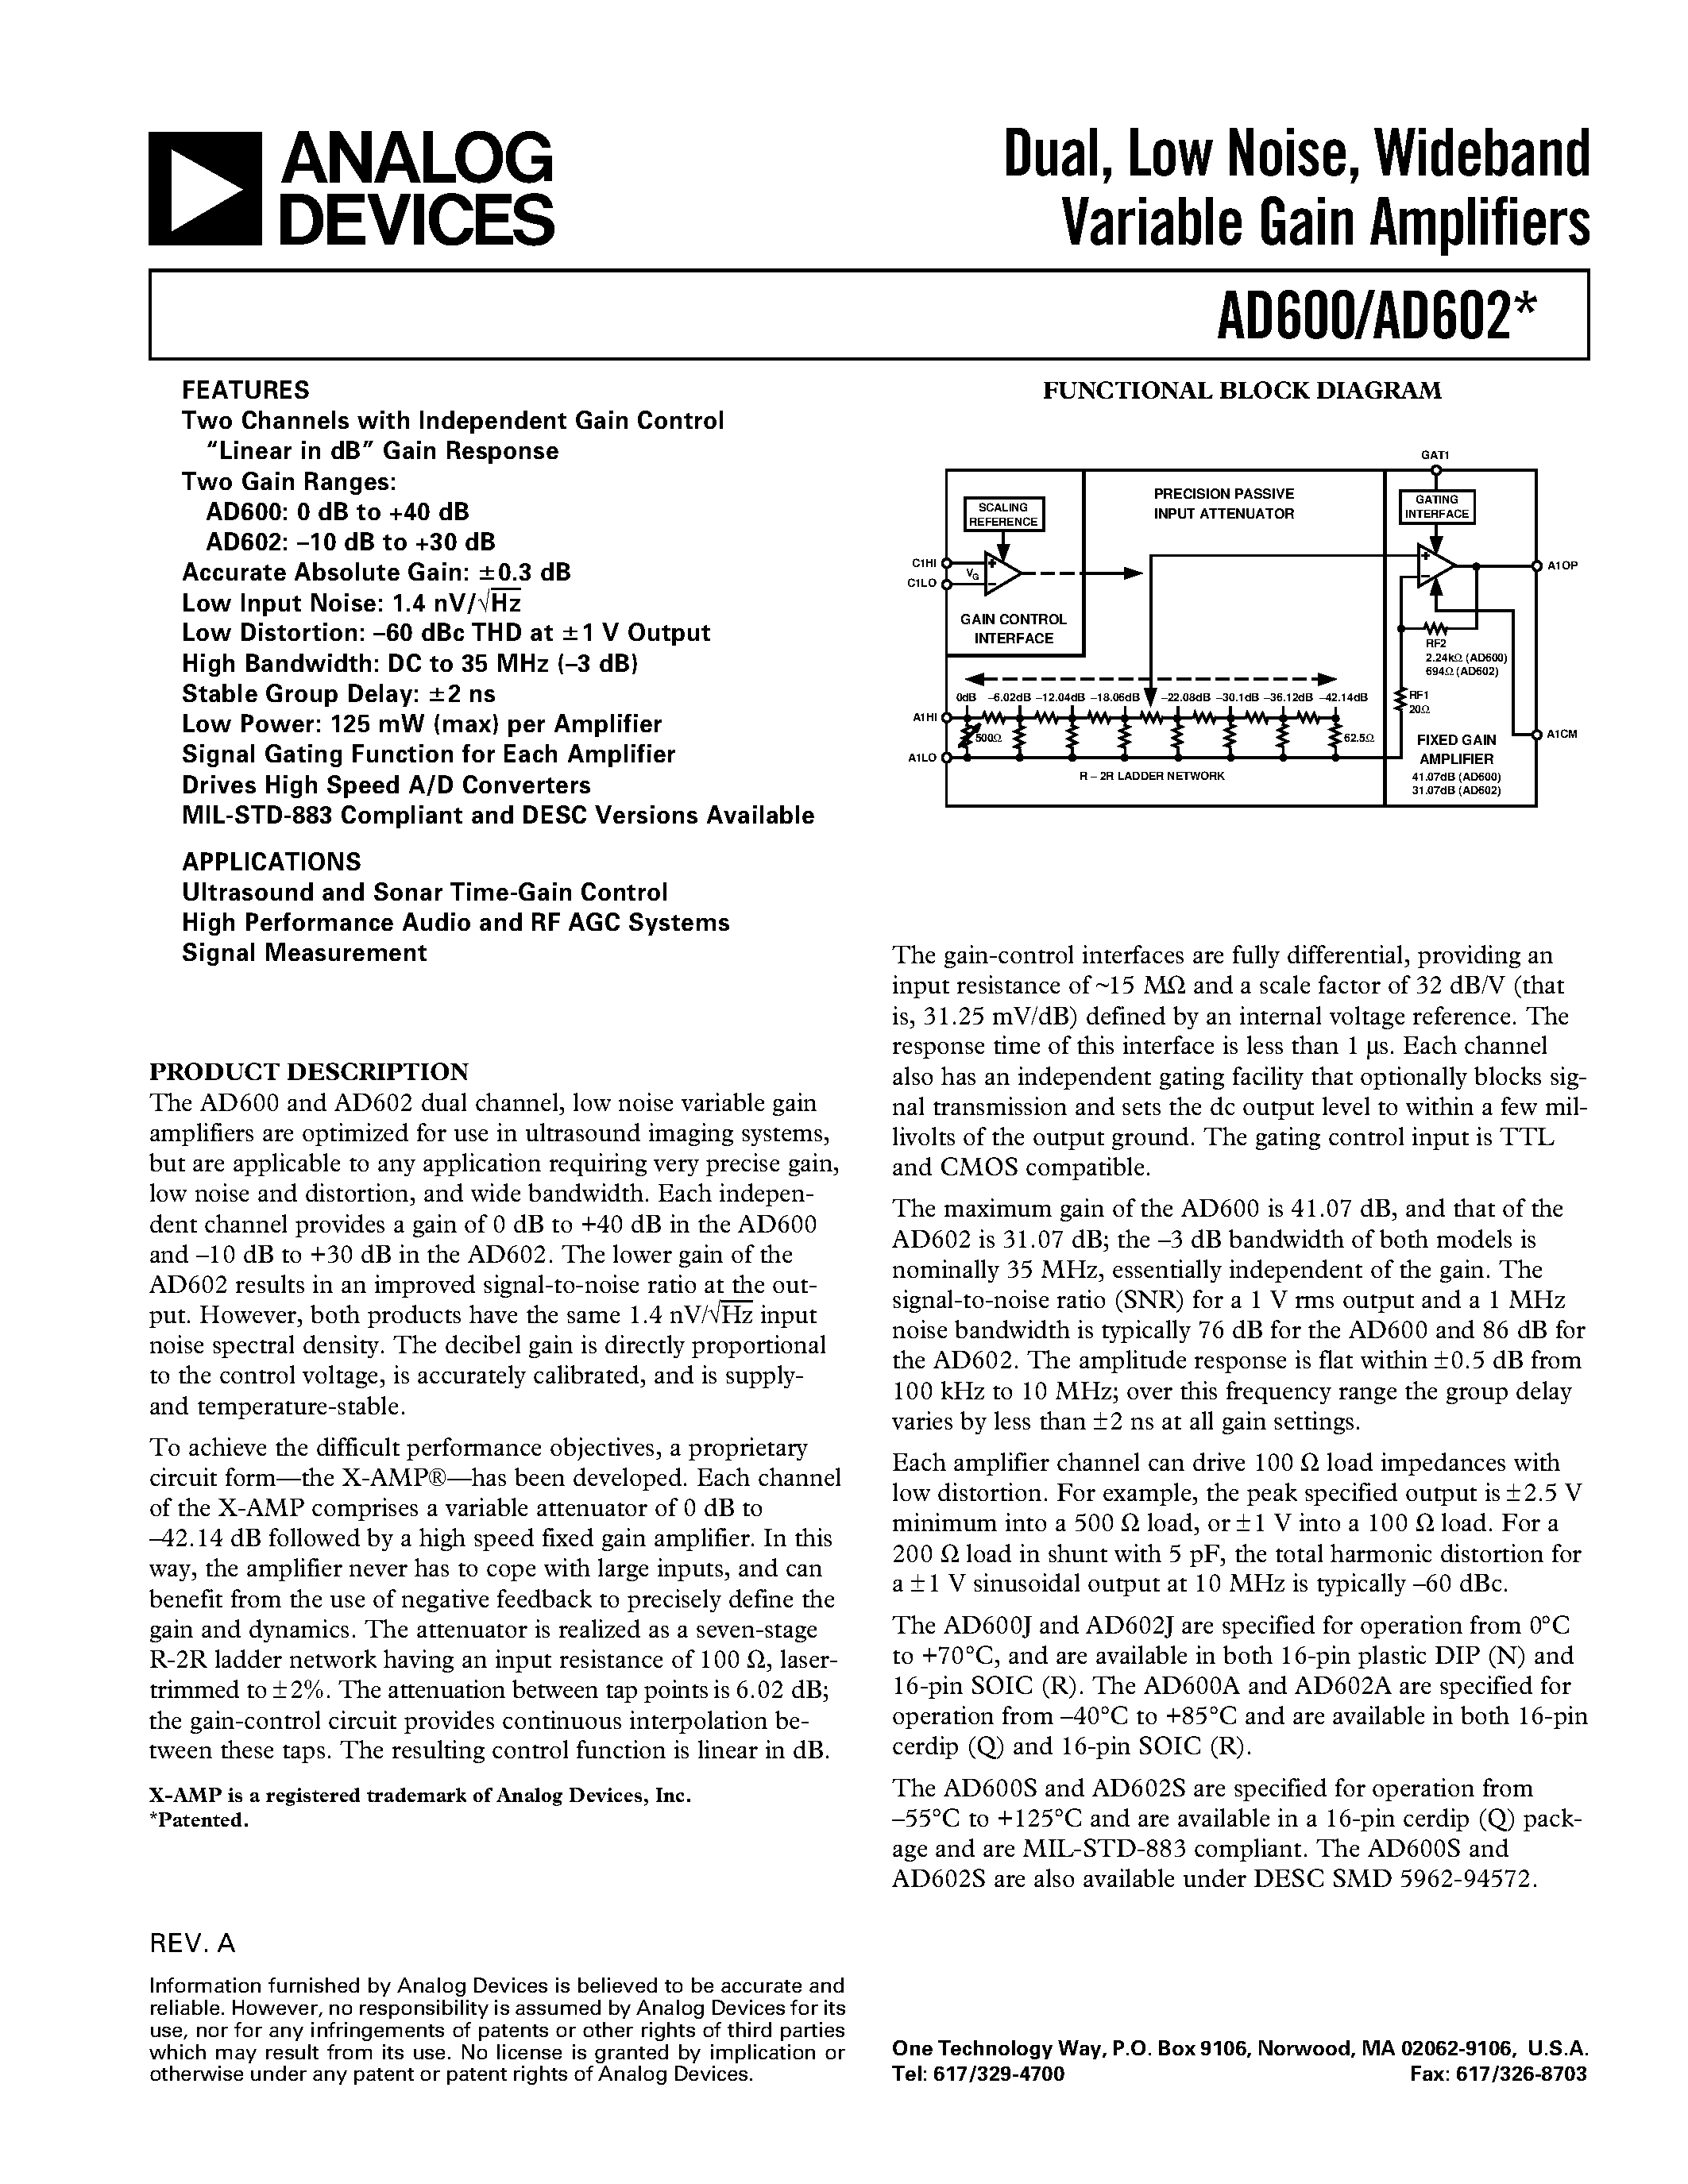 Datasheet AD602J - Dual/ Low Noise/ Wideband Variable Gain Amplifiers page 1